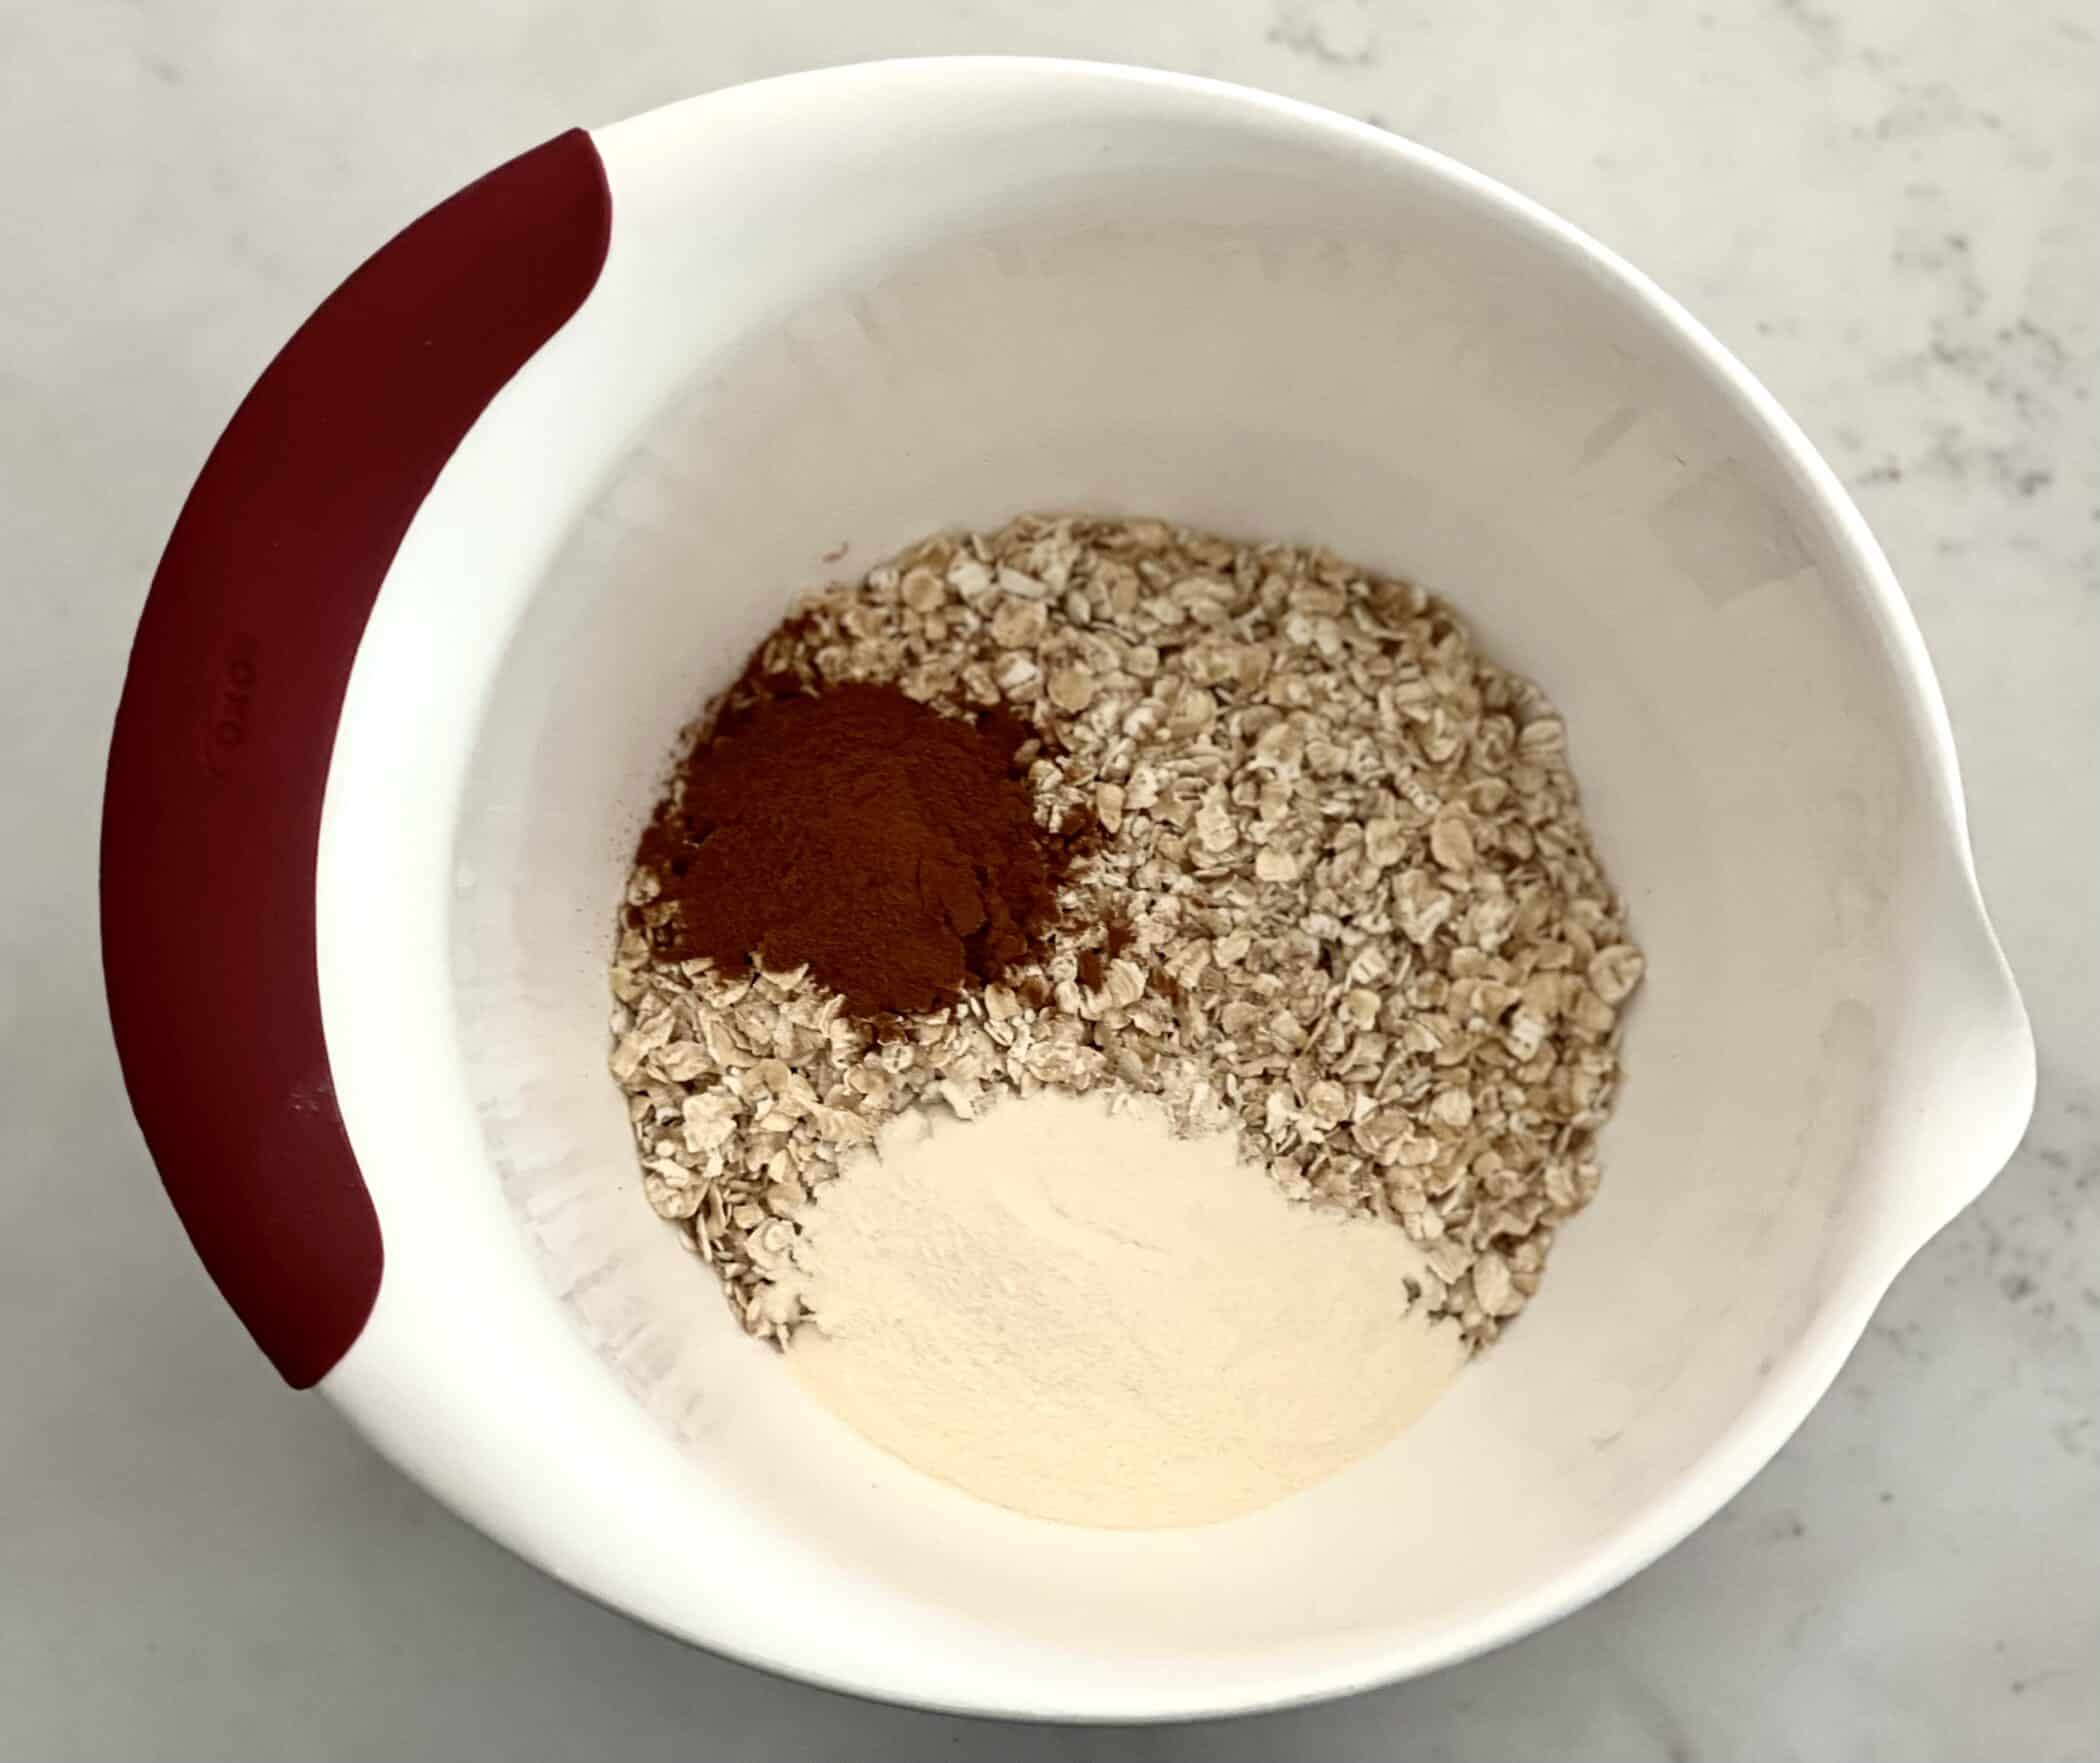 oats, protein powder and cinnamon in mixing bowl